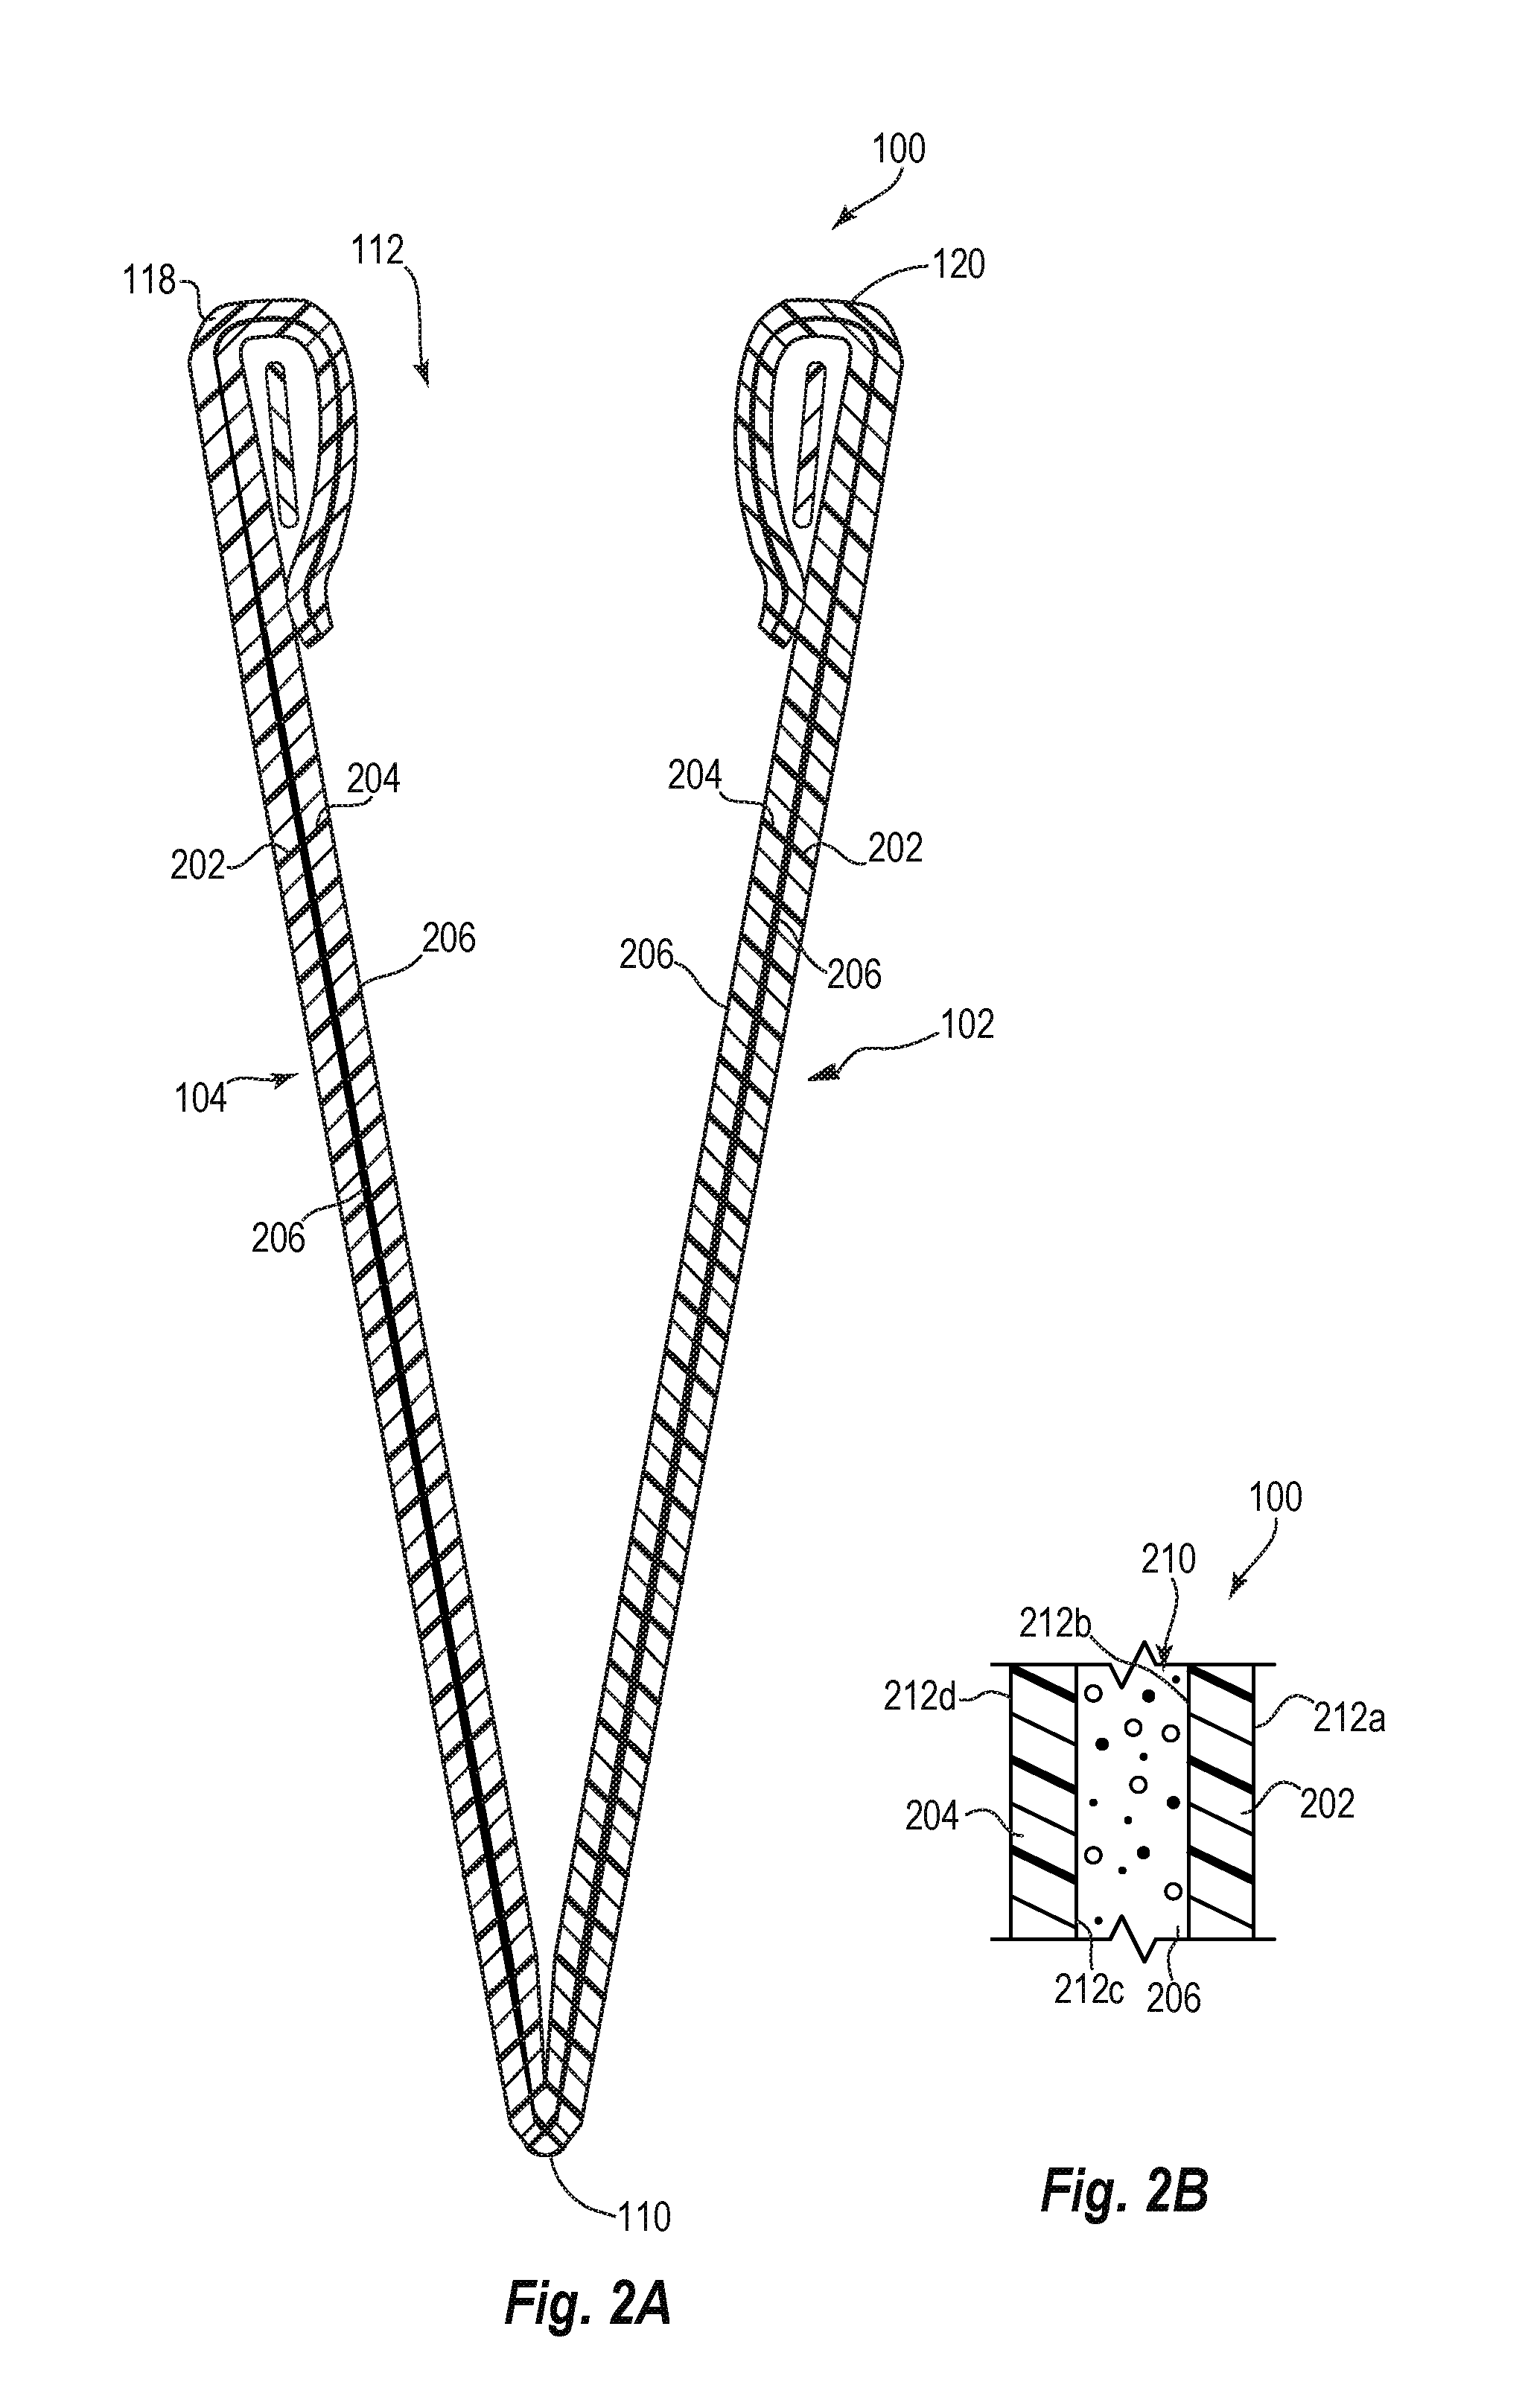 Multi-layer thermoplastic films and bags with enhanced odor control and methods of making the same